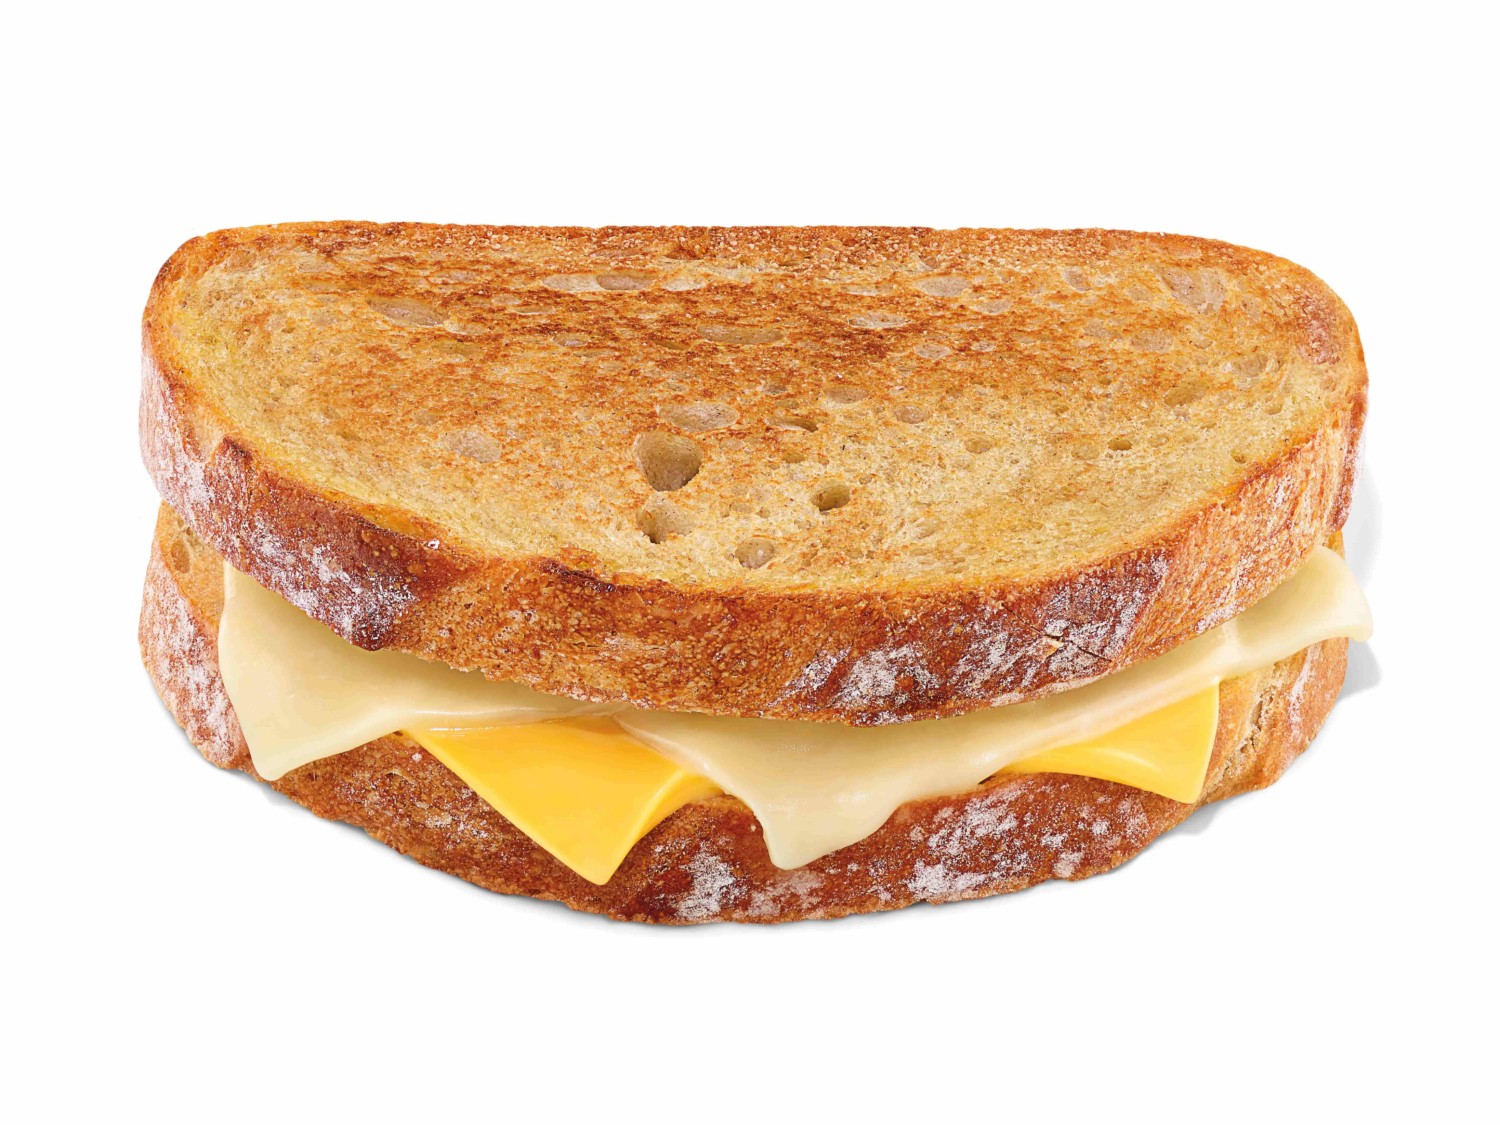 Dunkin' grilled cheese melt